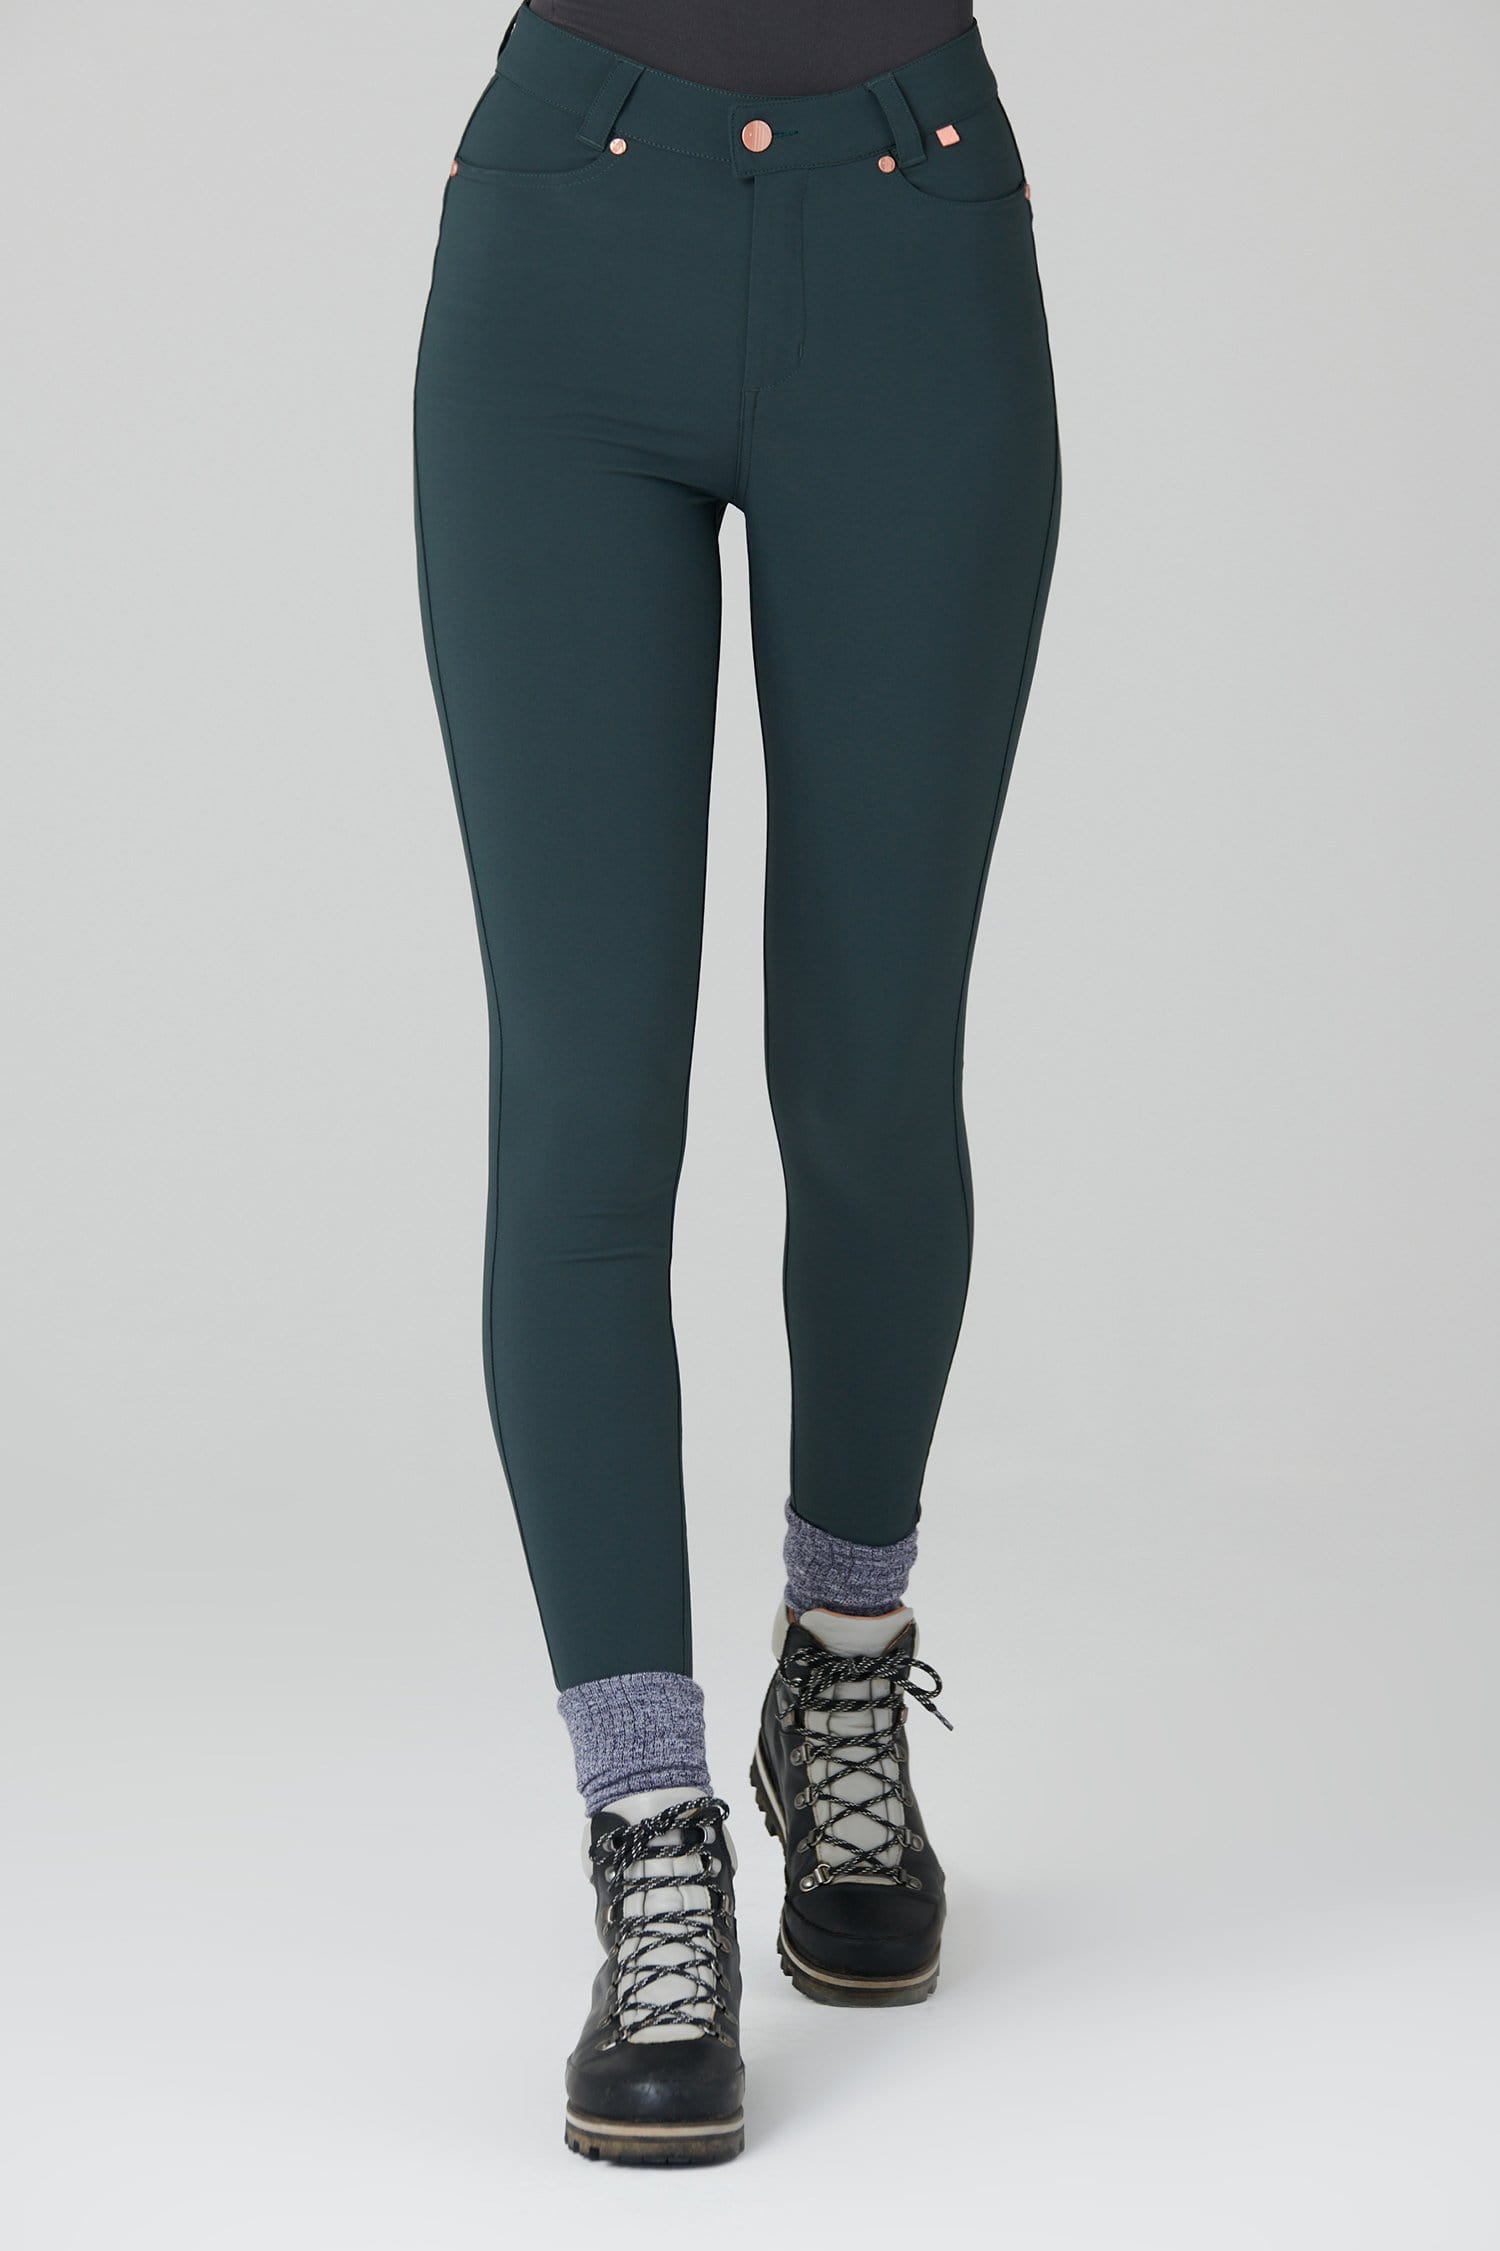 Thermal Skinny Outdoor Trousers - Forest Green - 30p / Uk12 - Womens - Acai Outdoorwear